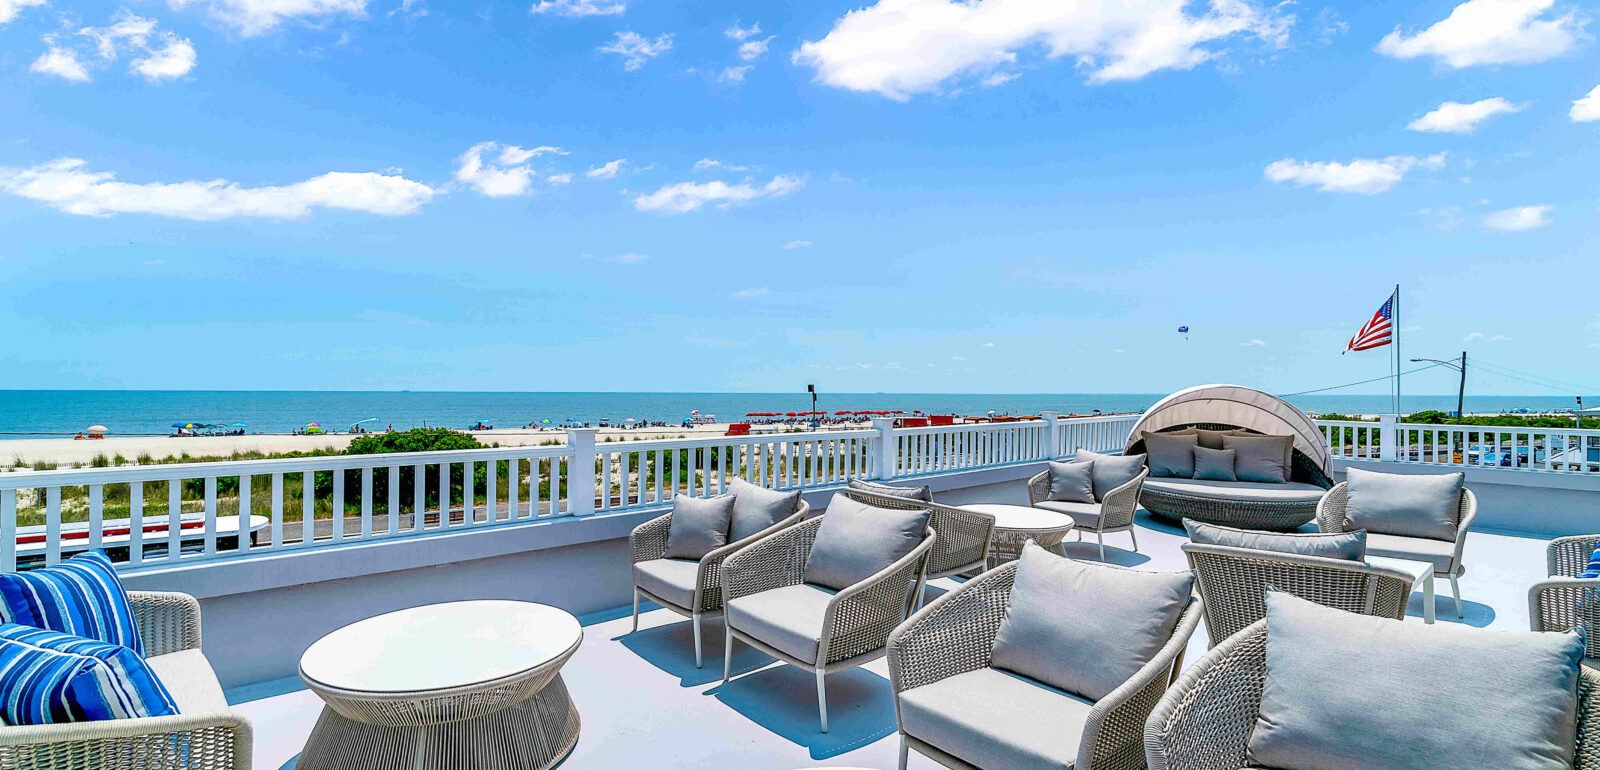 Sun deck with lounge chairs overlooking the ocean at our Cape May resort